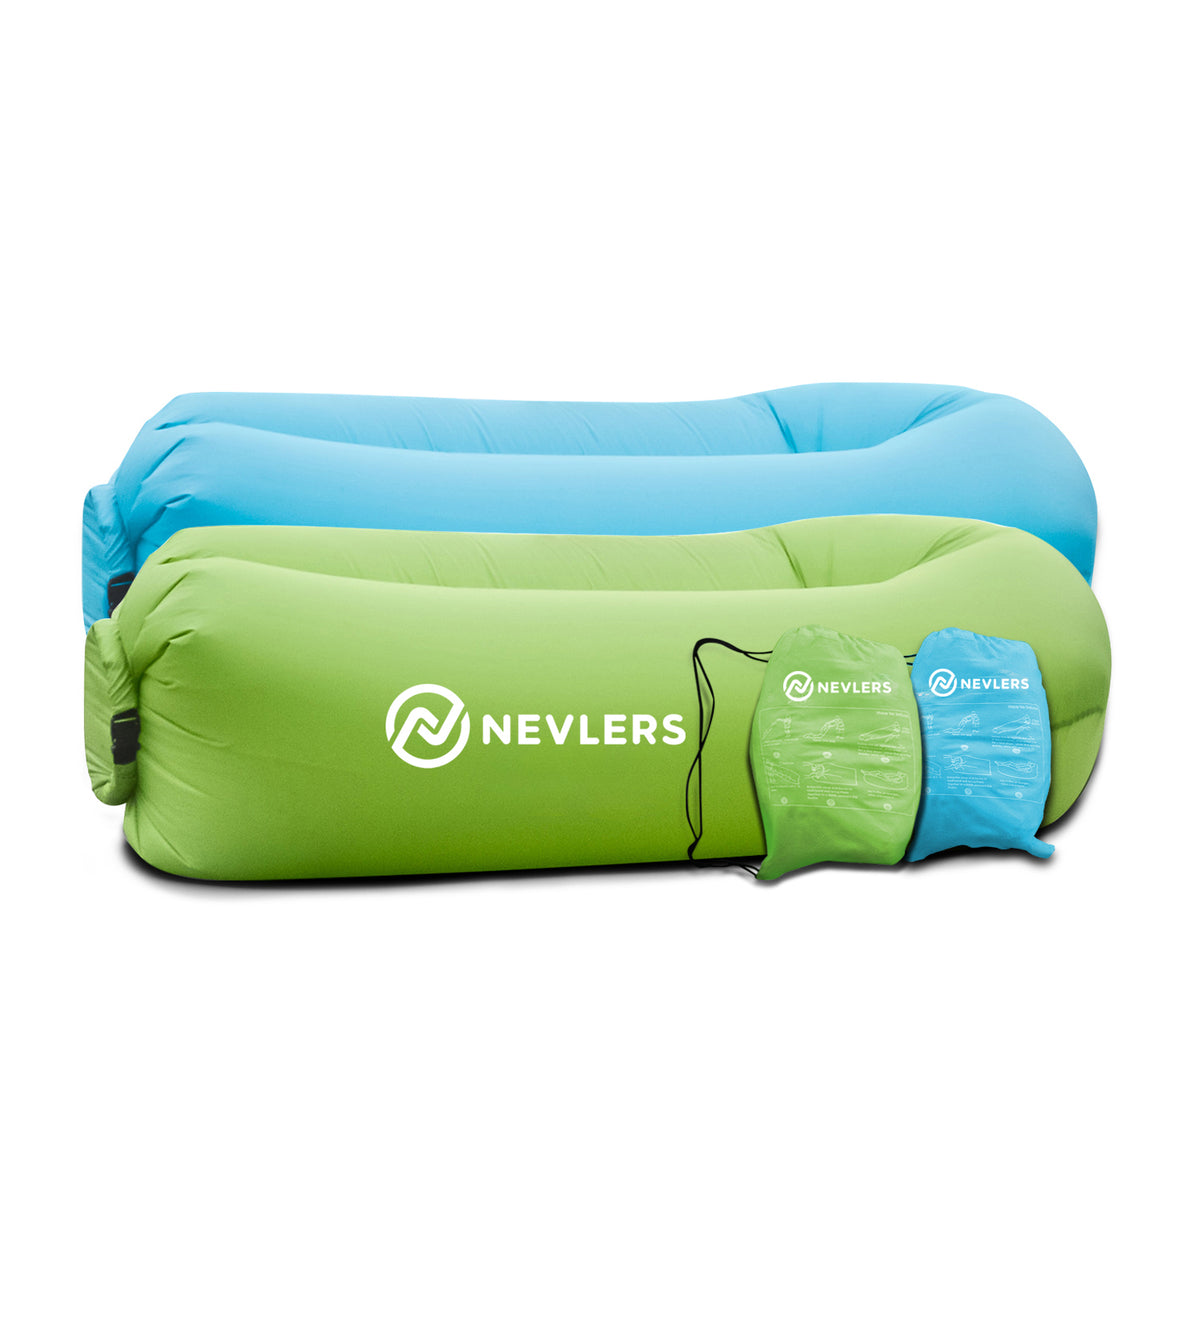 Inflatable Loungers - Blue/Green - 2 Pack